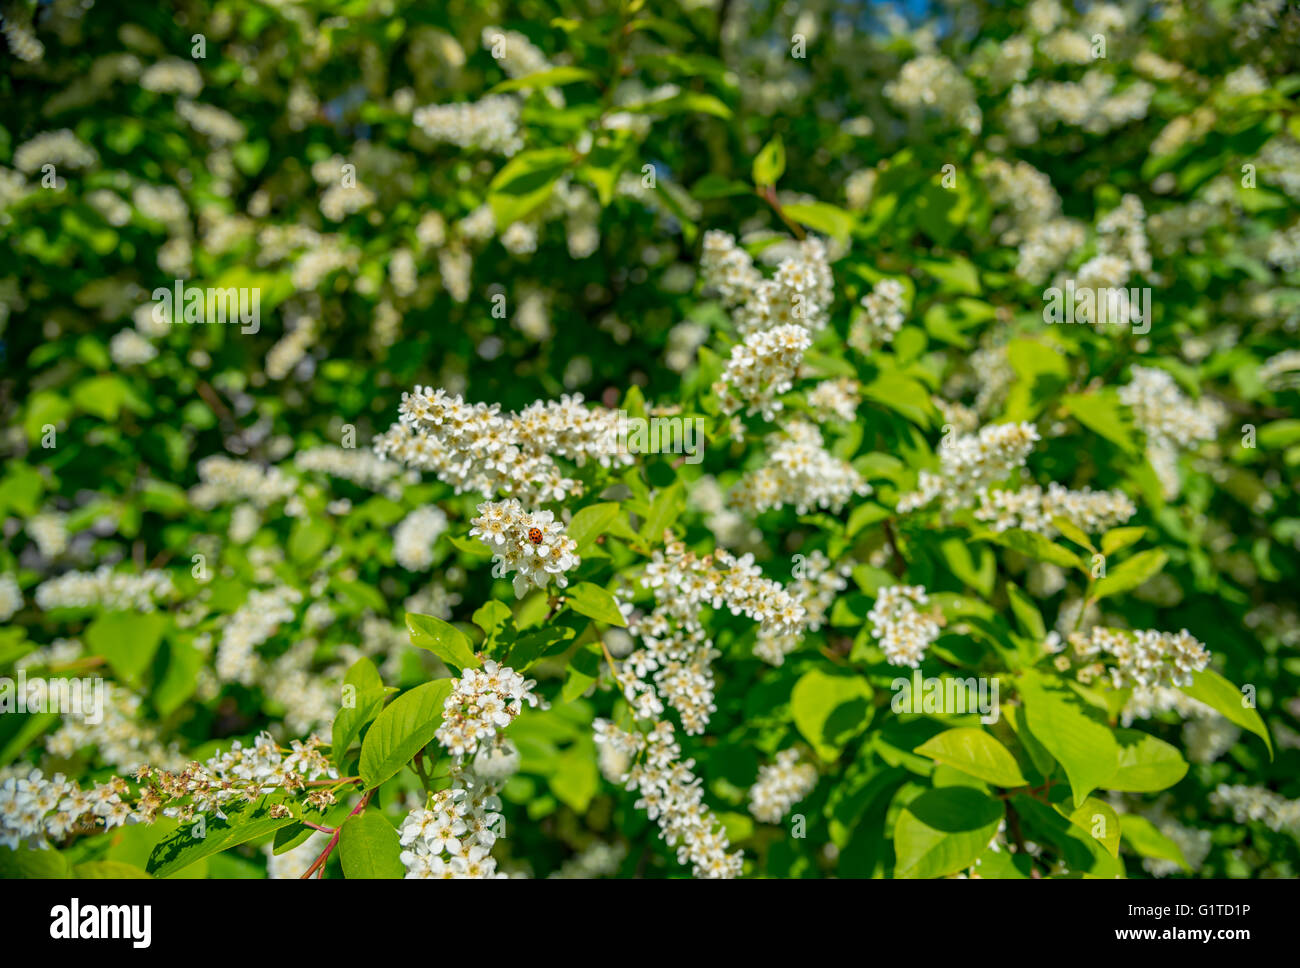 Cherry blossoms over blurred nature background Stock Photo - Alamy